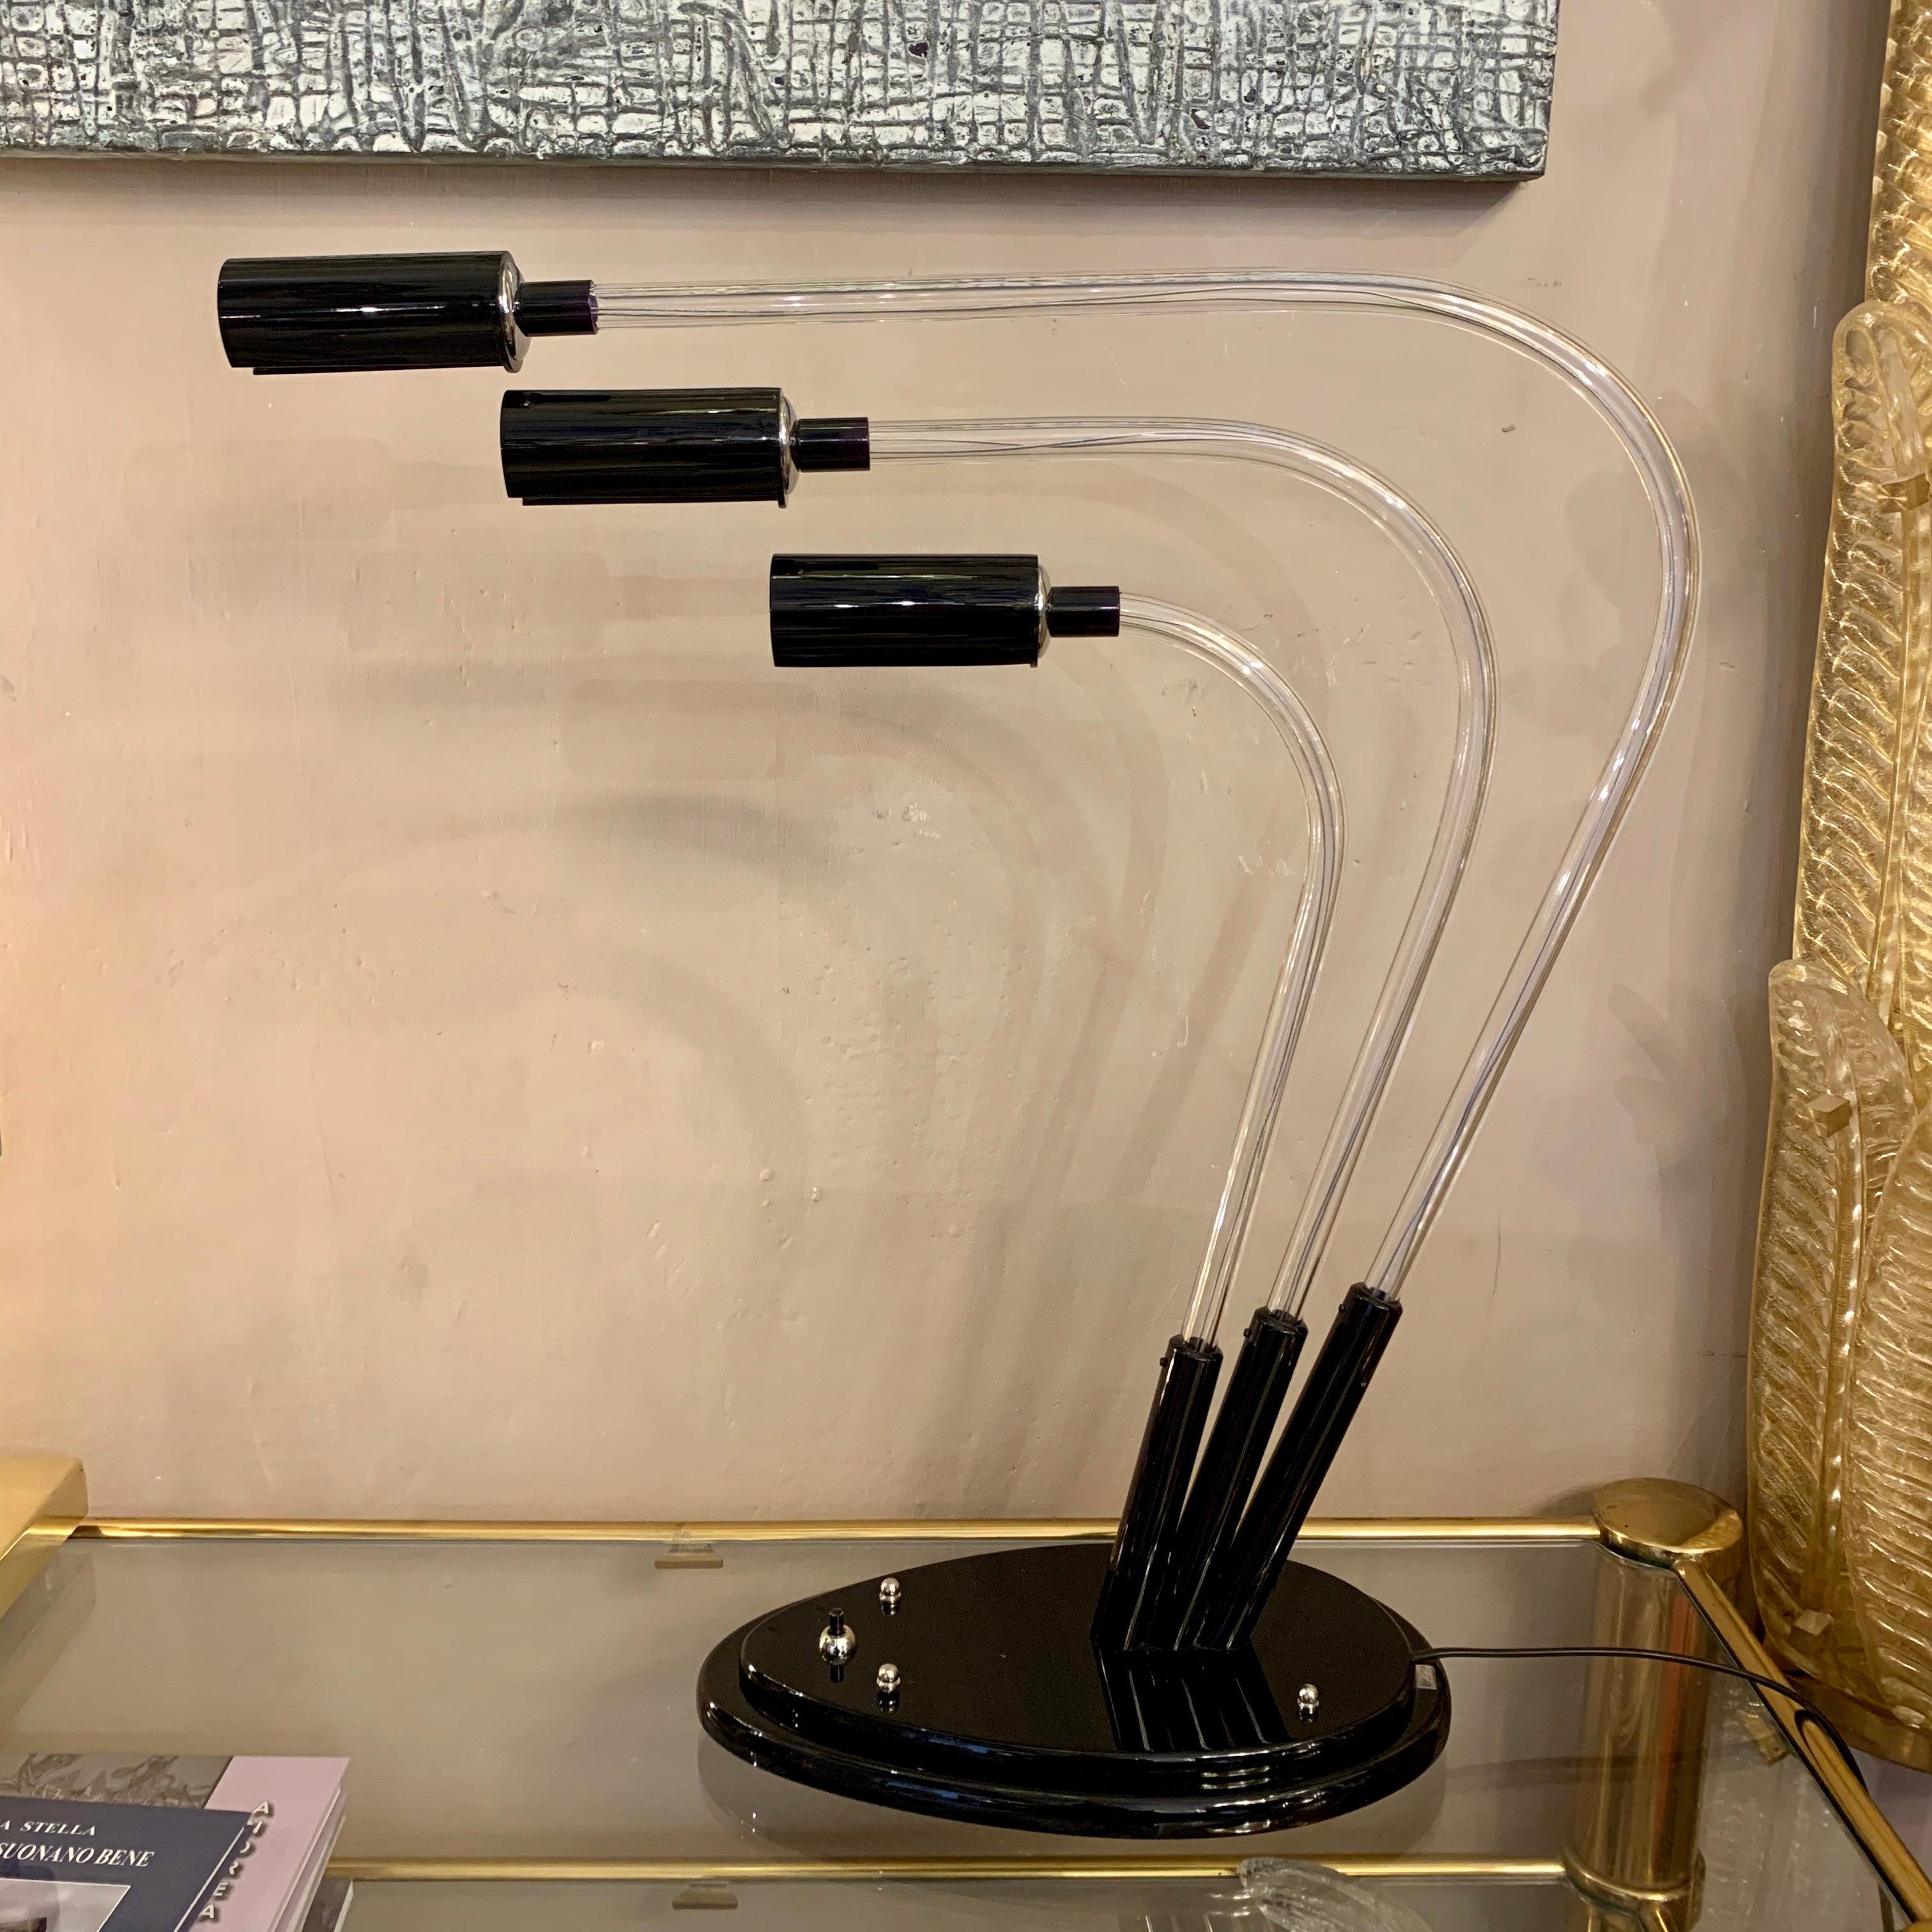 Vintage Italian design table lamp in black and clear plexiglass, oval base.
The electrical system has been redone with three led lights.